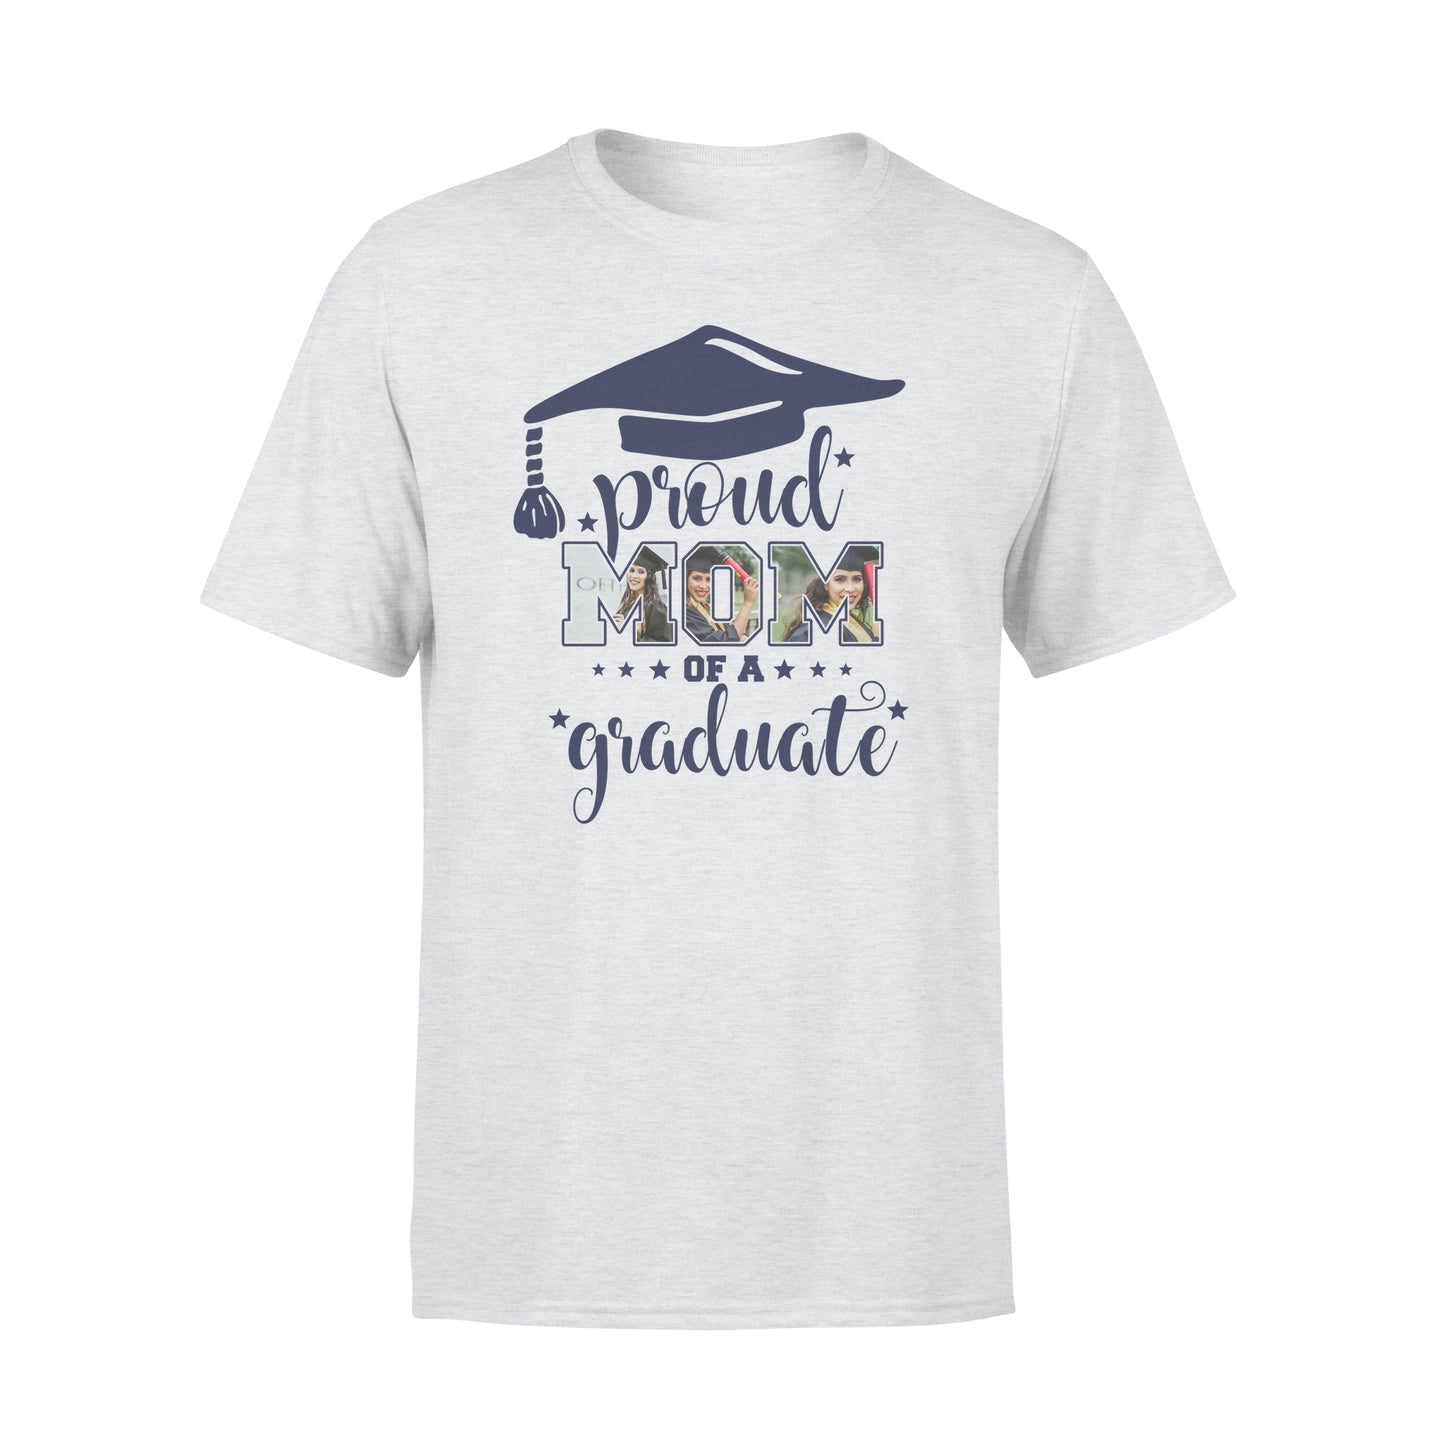 Custom personalized photo T Shirts graduation gifts for senior, family, best friends & graduated class - Proud Mom of a Graduate